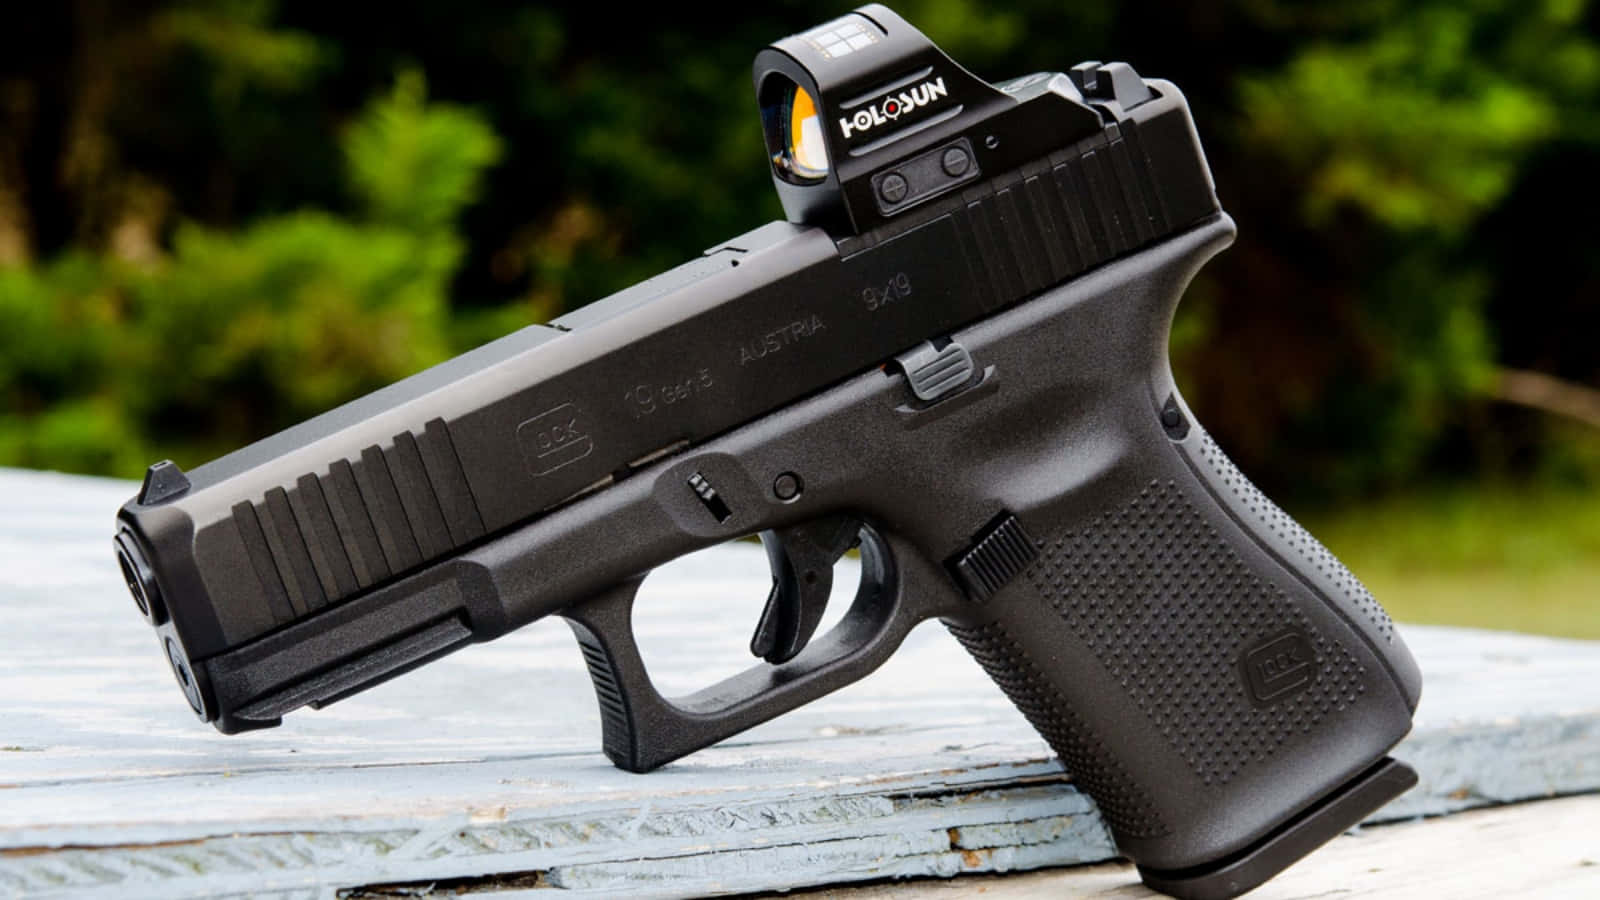 "Glock 19 ready to use and defend"